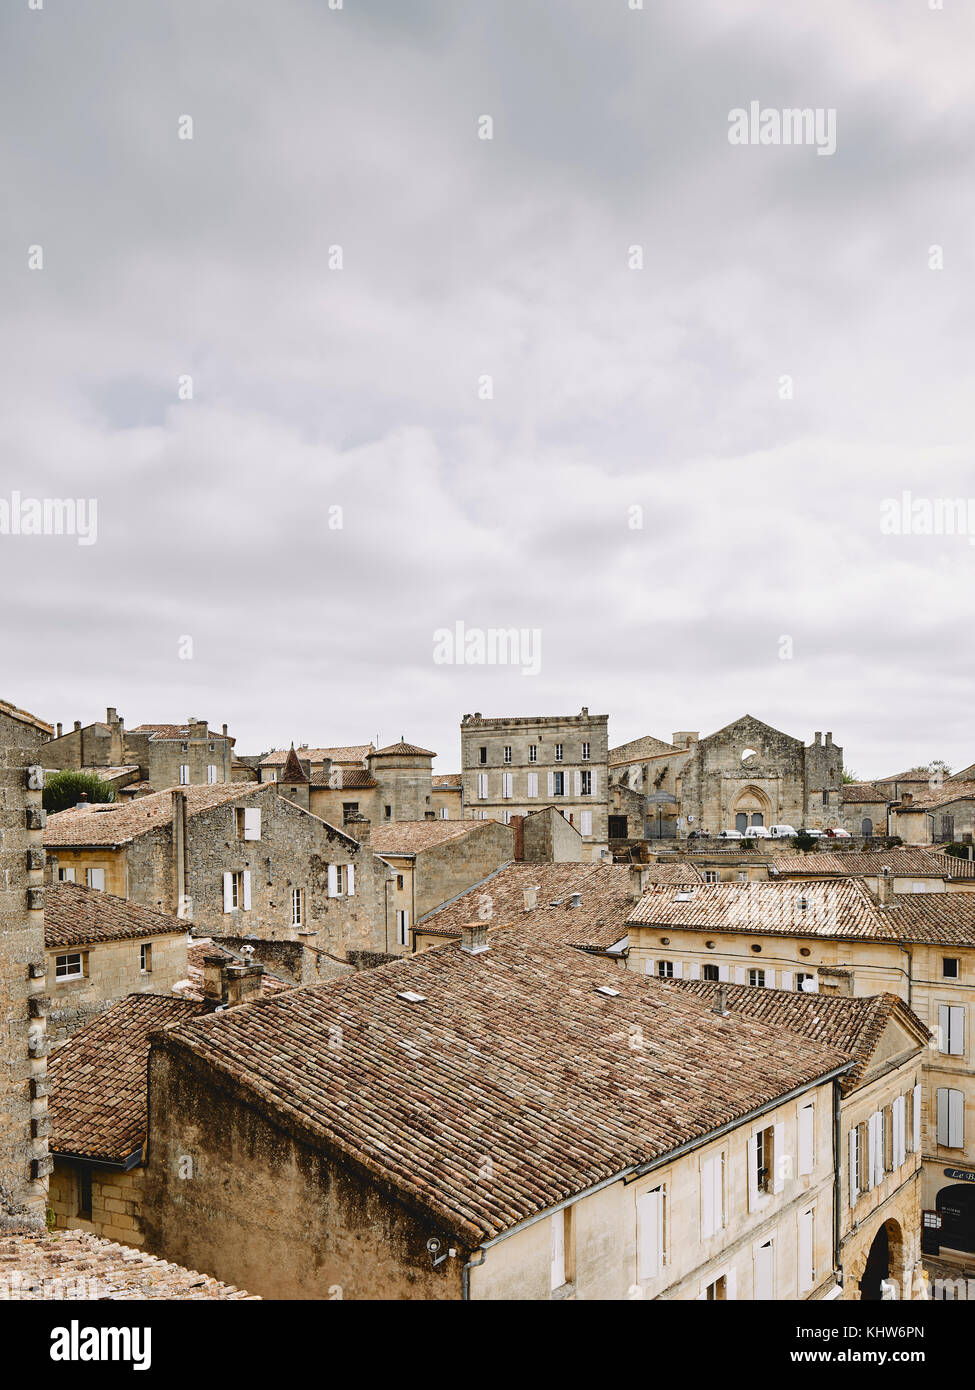 Elevated cityscape with rooftops and medieval buildings, Saint-Emilion, Aquitaine, France Stock Photo